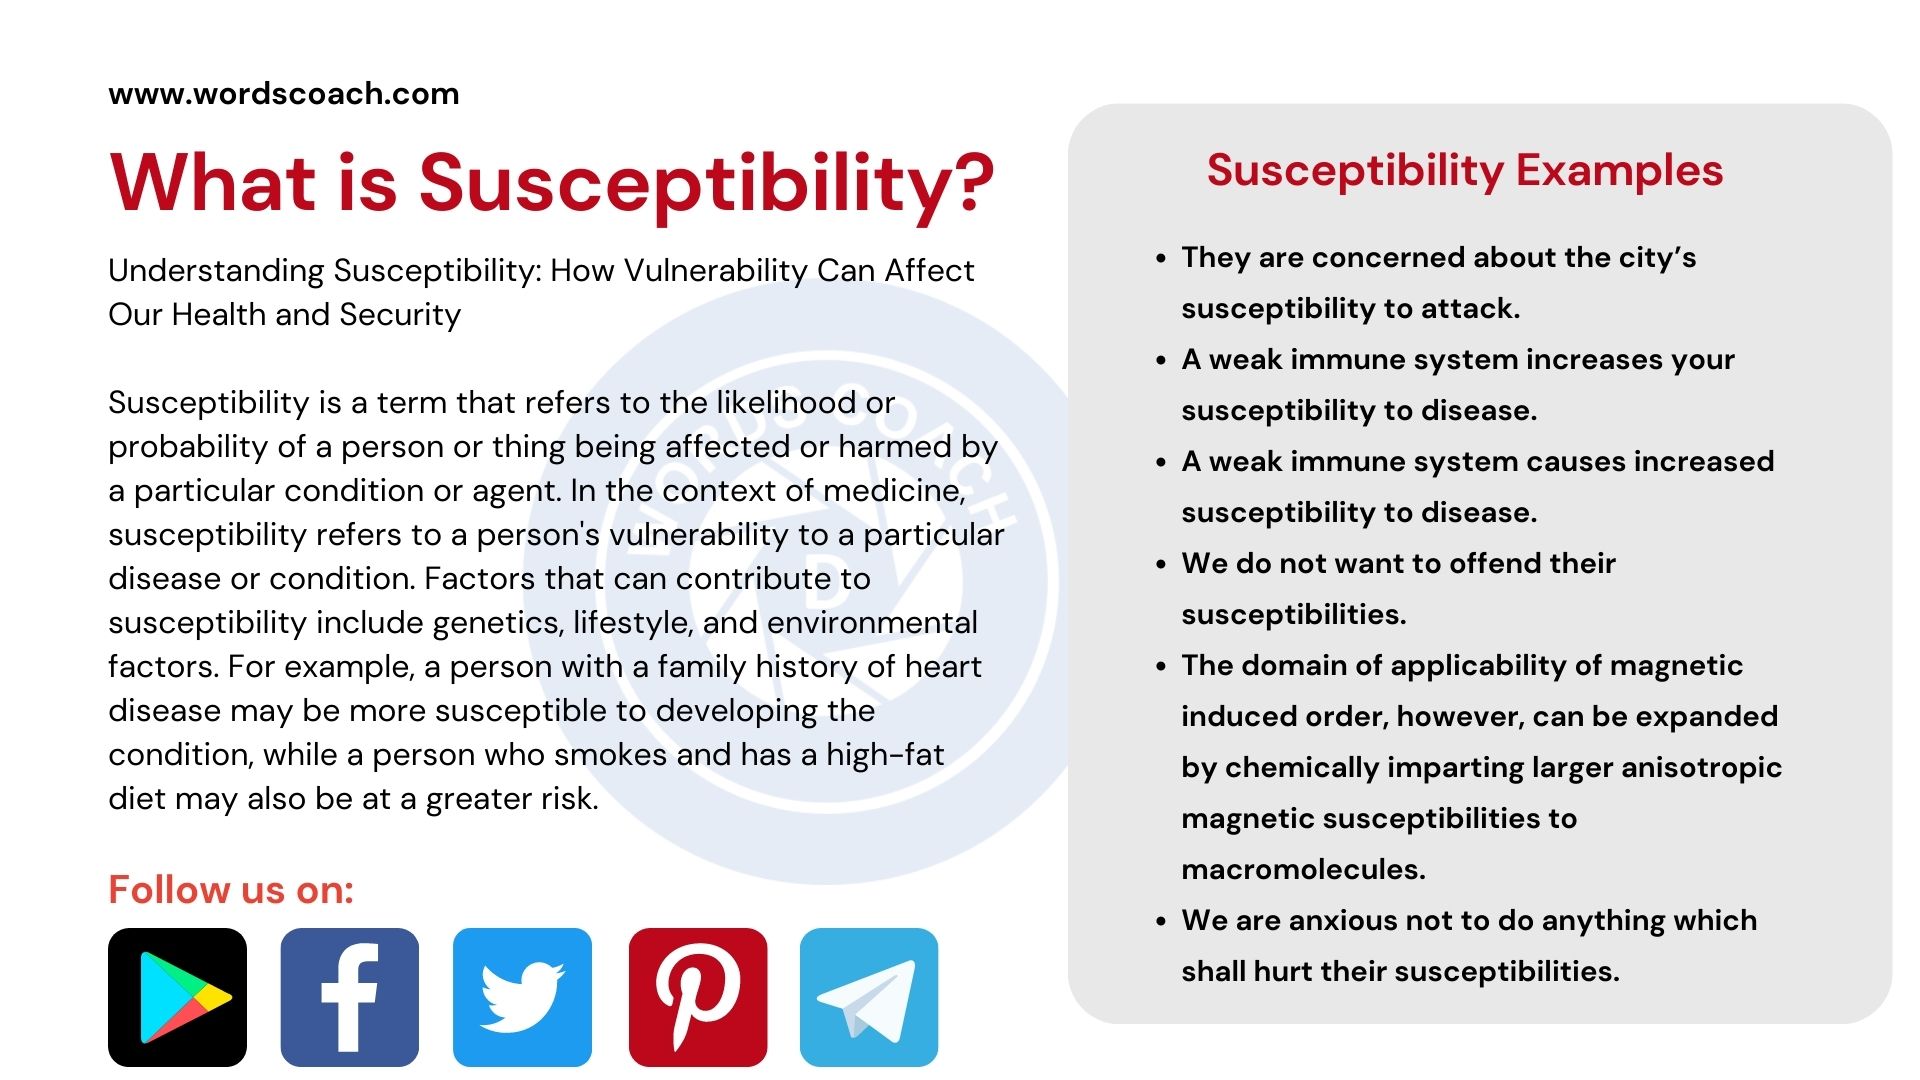 Susceptible - Definition and Examples - Biology Online Dictionary